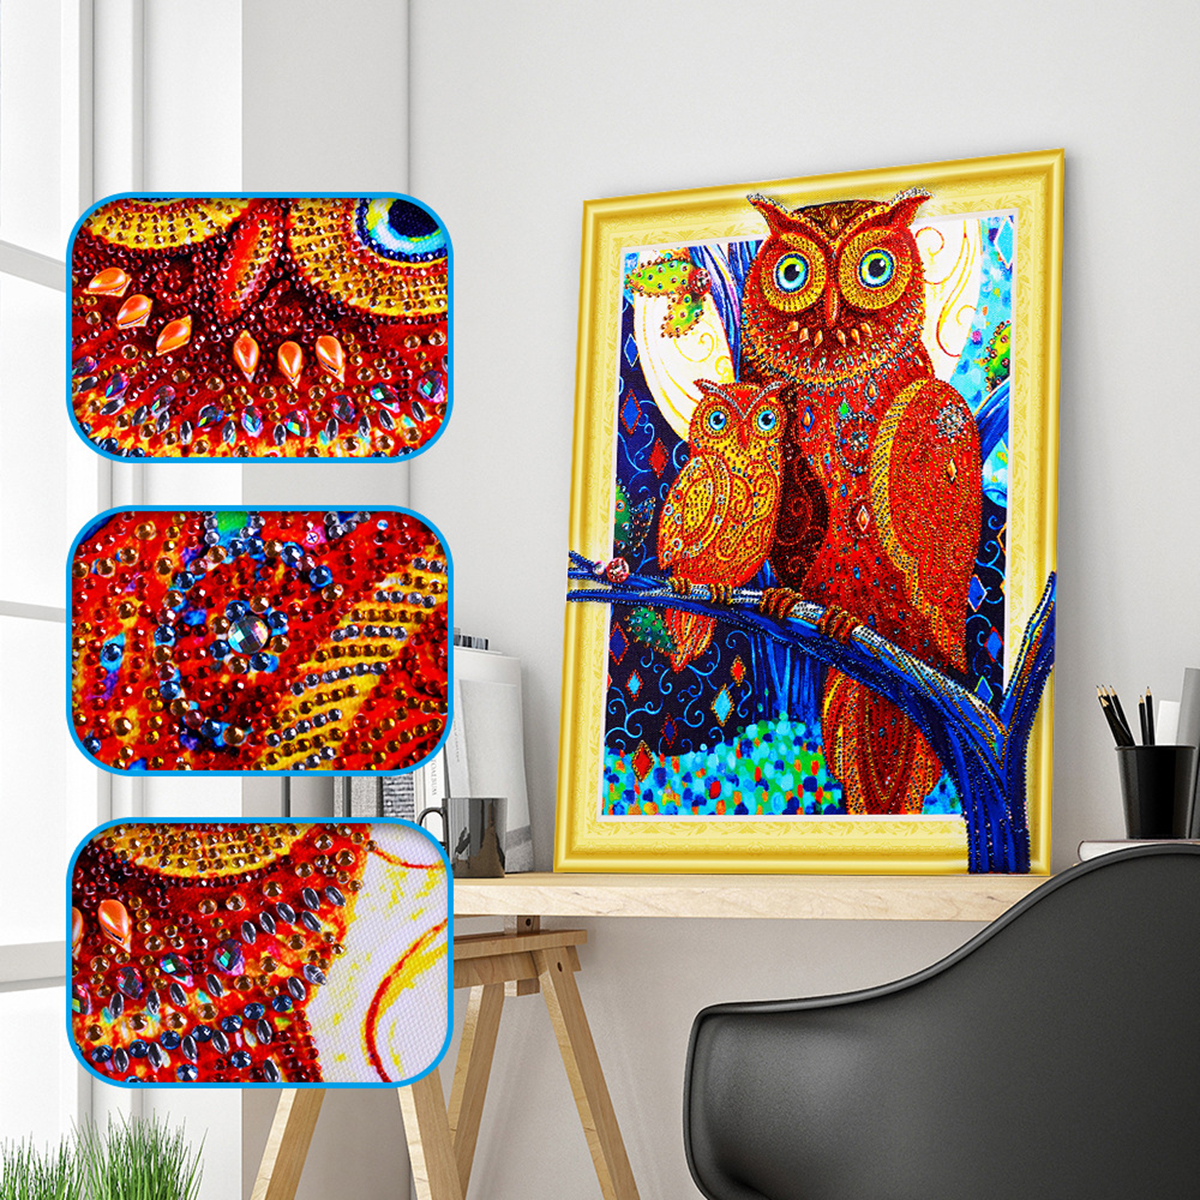 5D-Diamond-Painting-Horse-Owl-Lion-Embroidery-Cross-Stitch-Kit-Home-Office-Decorations-1692308-2